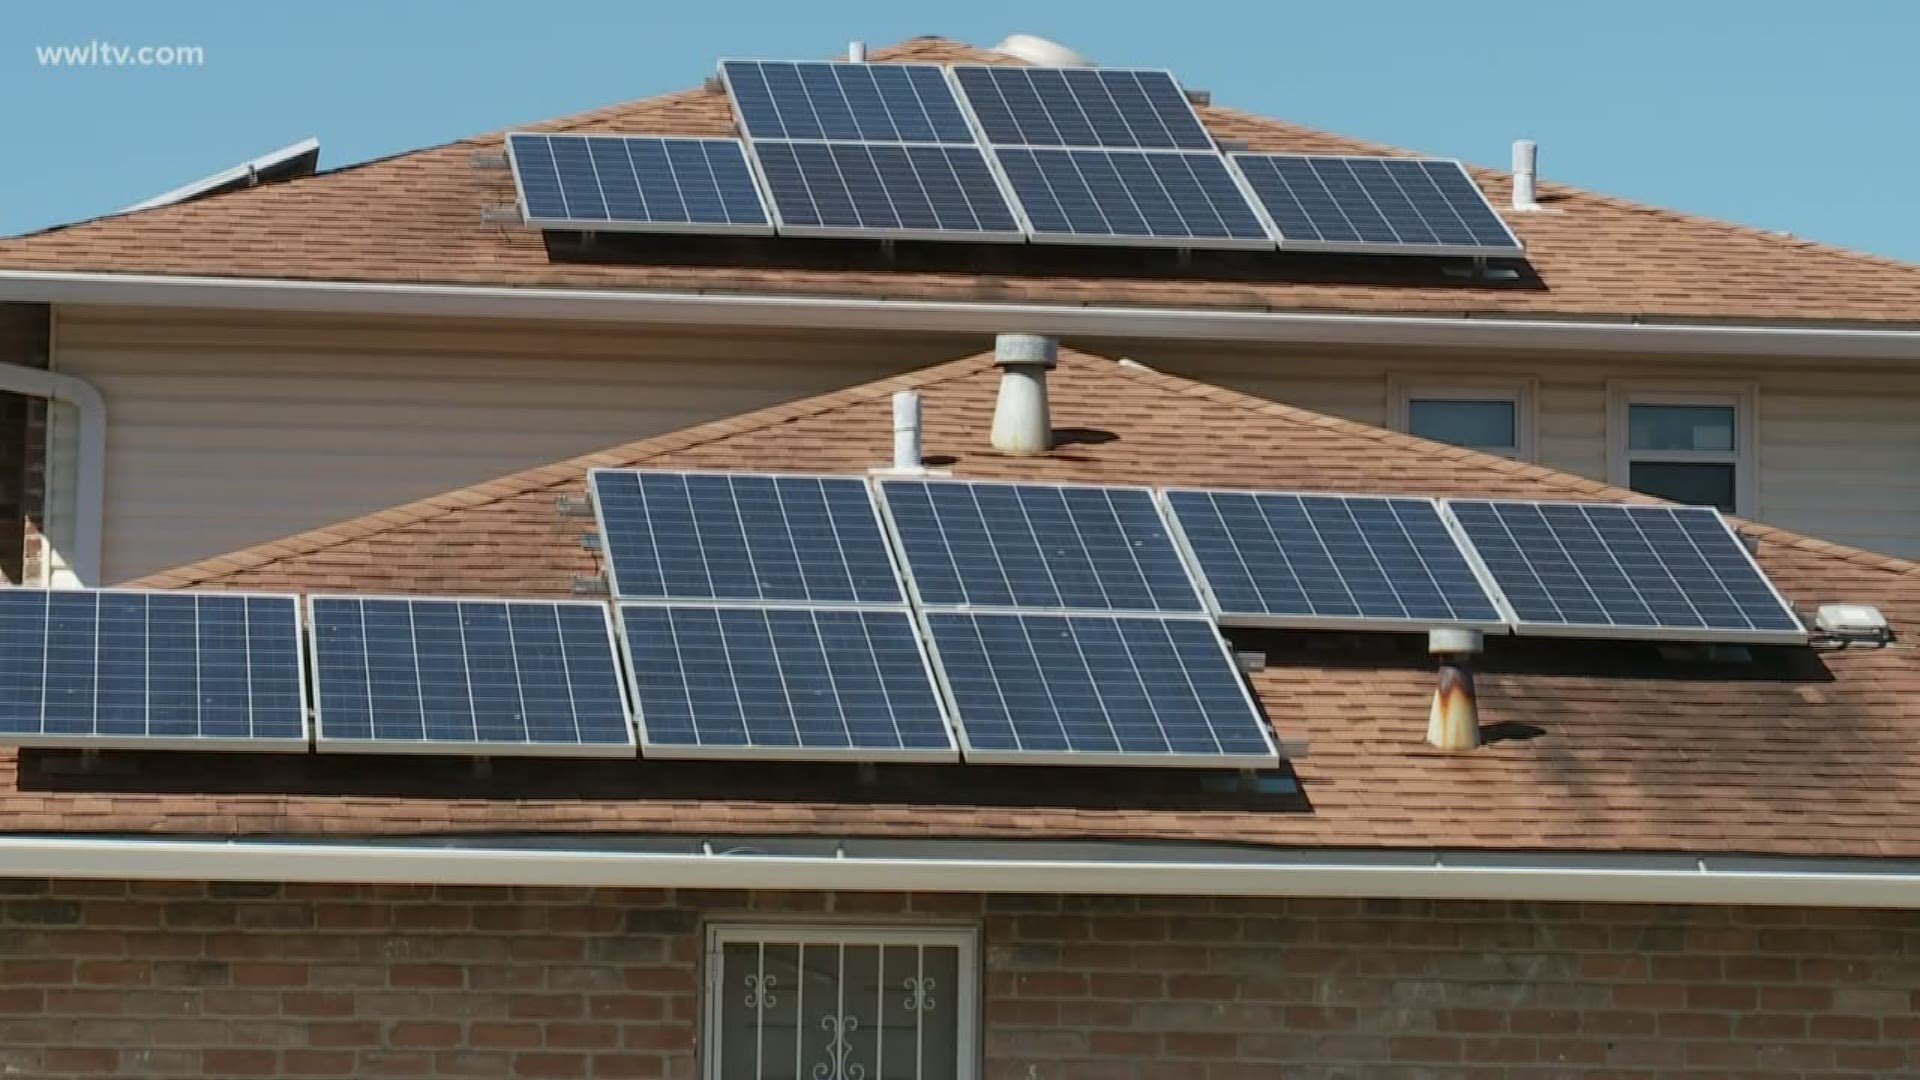 It's another major hit to a financial incentive for installing solar panels